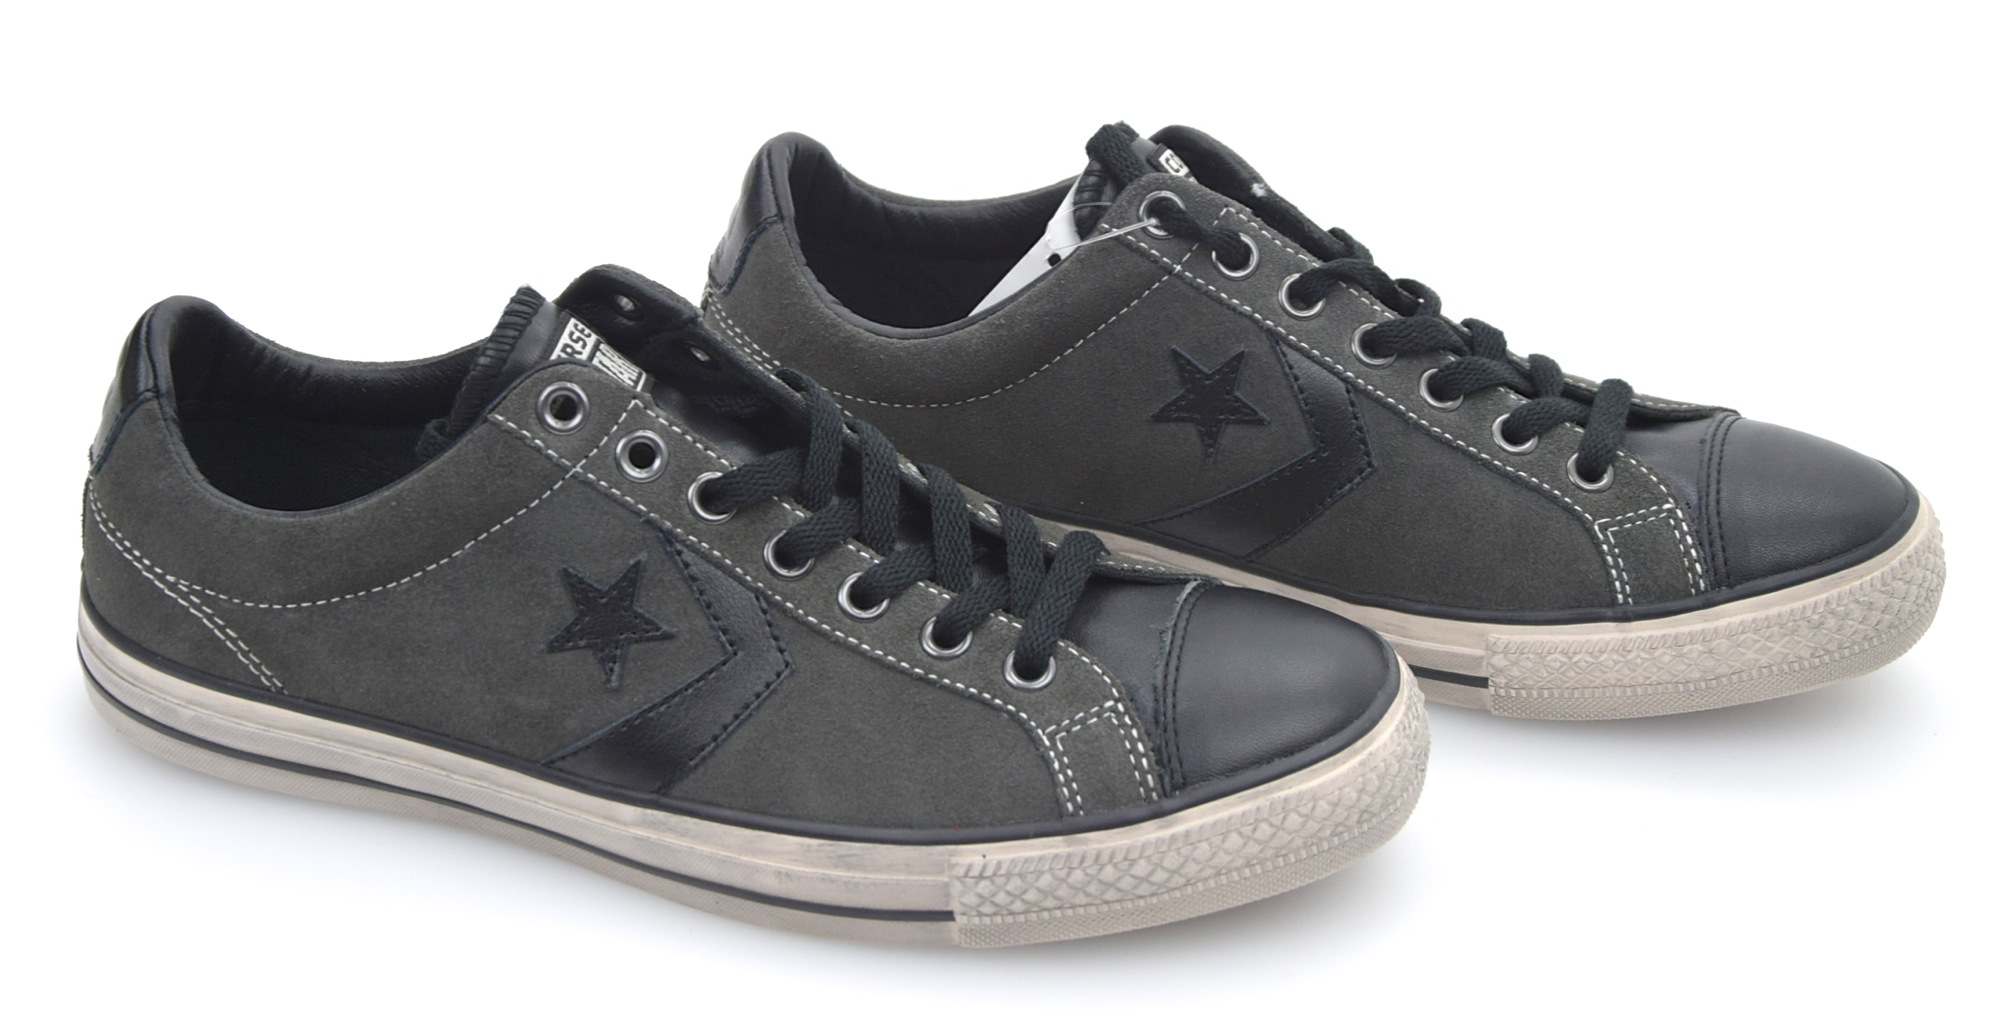 CONVERSE ALLA STAR WOMAN SNEAKER SHOES SPORTS CASUAL TRAINERS CODE 